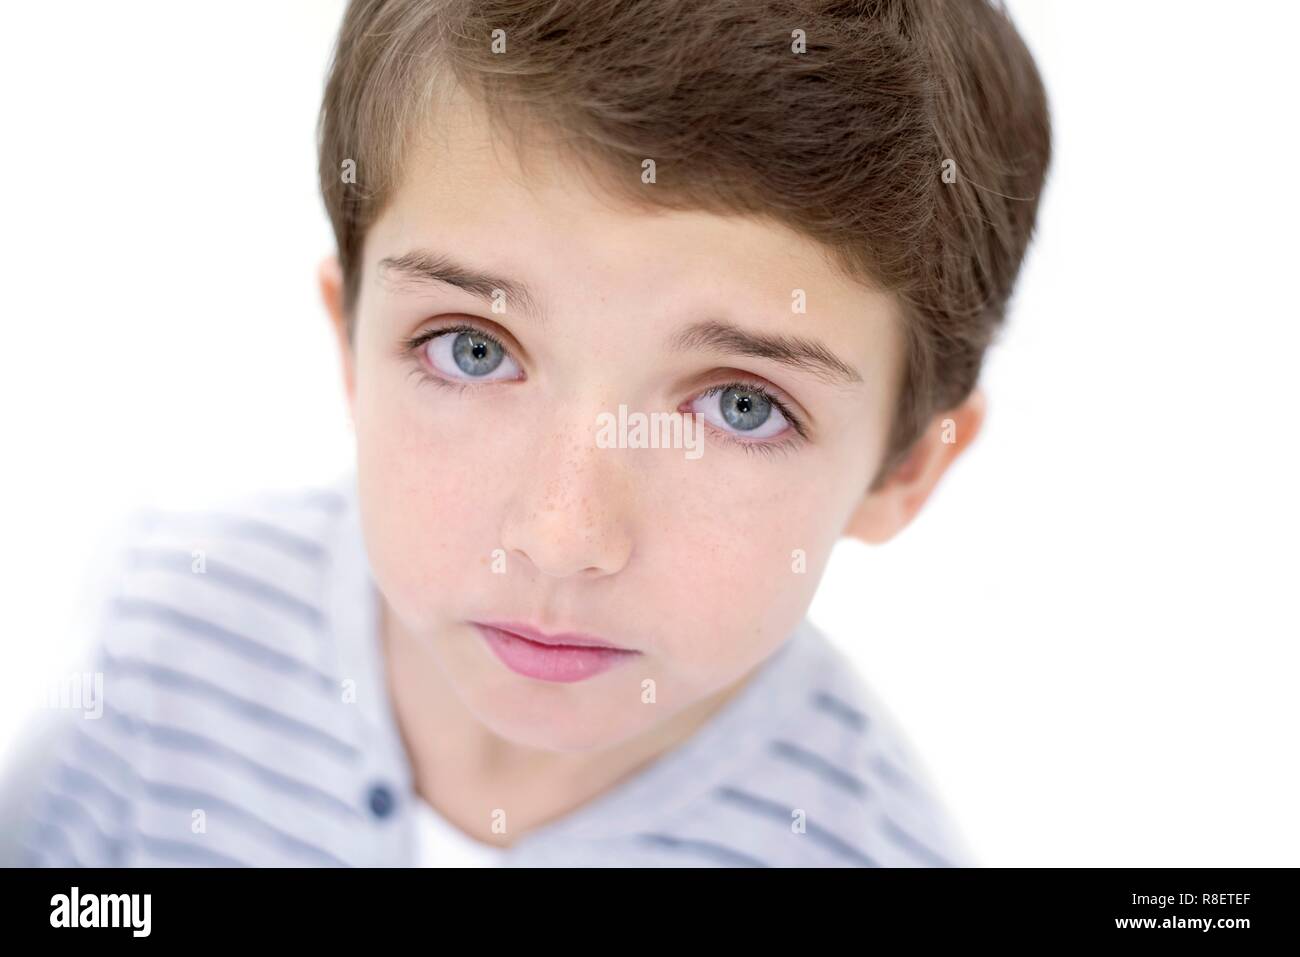 Young boy looking up toward camera, portrait. Stock Photo